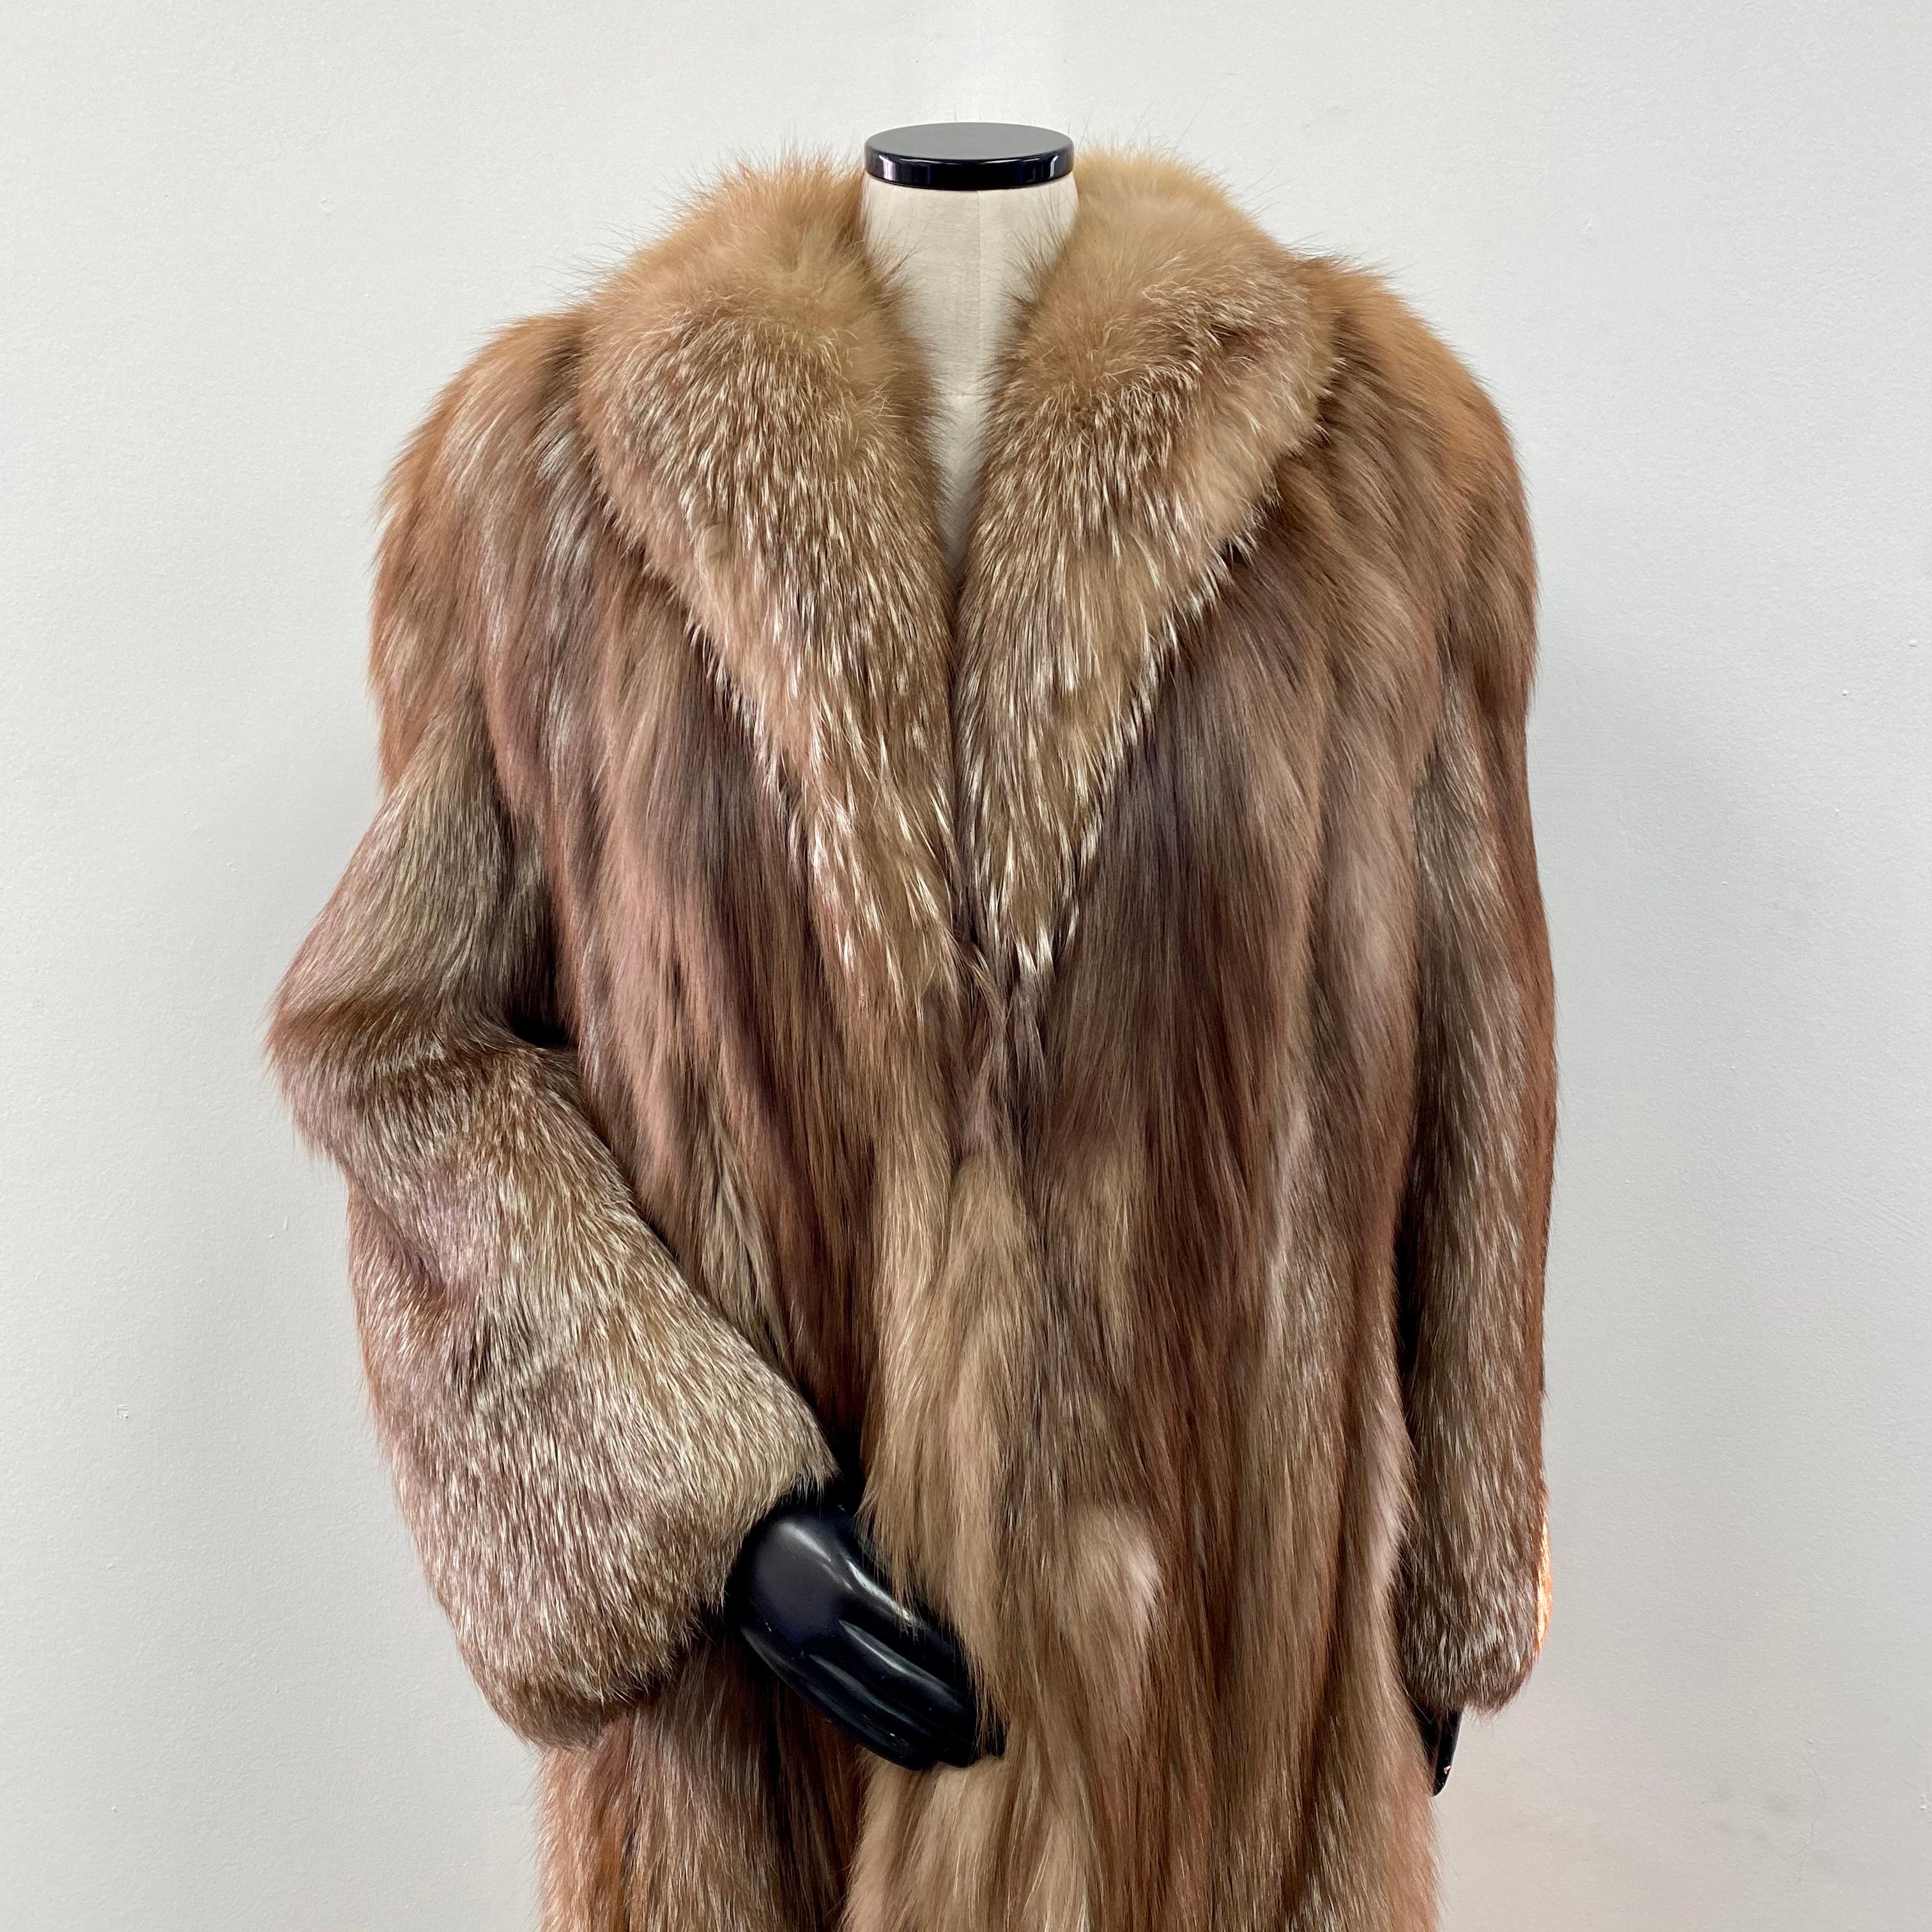 PRODUCT DESCRIPTION:

Brown dyed silver fox fur mid-length coat

Condition: Pristine

Closure: German hooks

Color: Brown and Silver

Material: Silver fox fur

Garment type: Mid length Coat

Sleeves: Straight

Pockets: Two slit pockets

Collar: